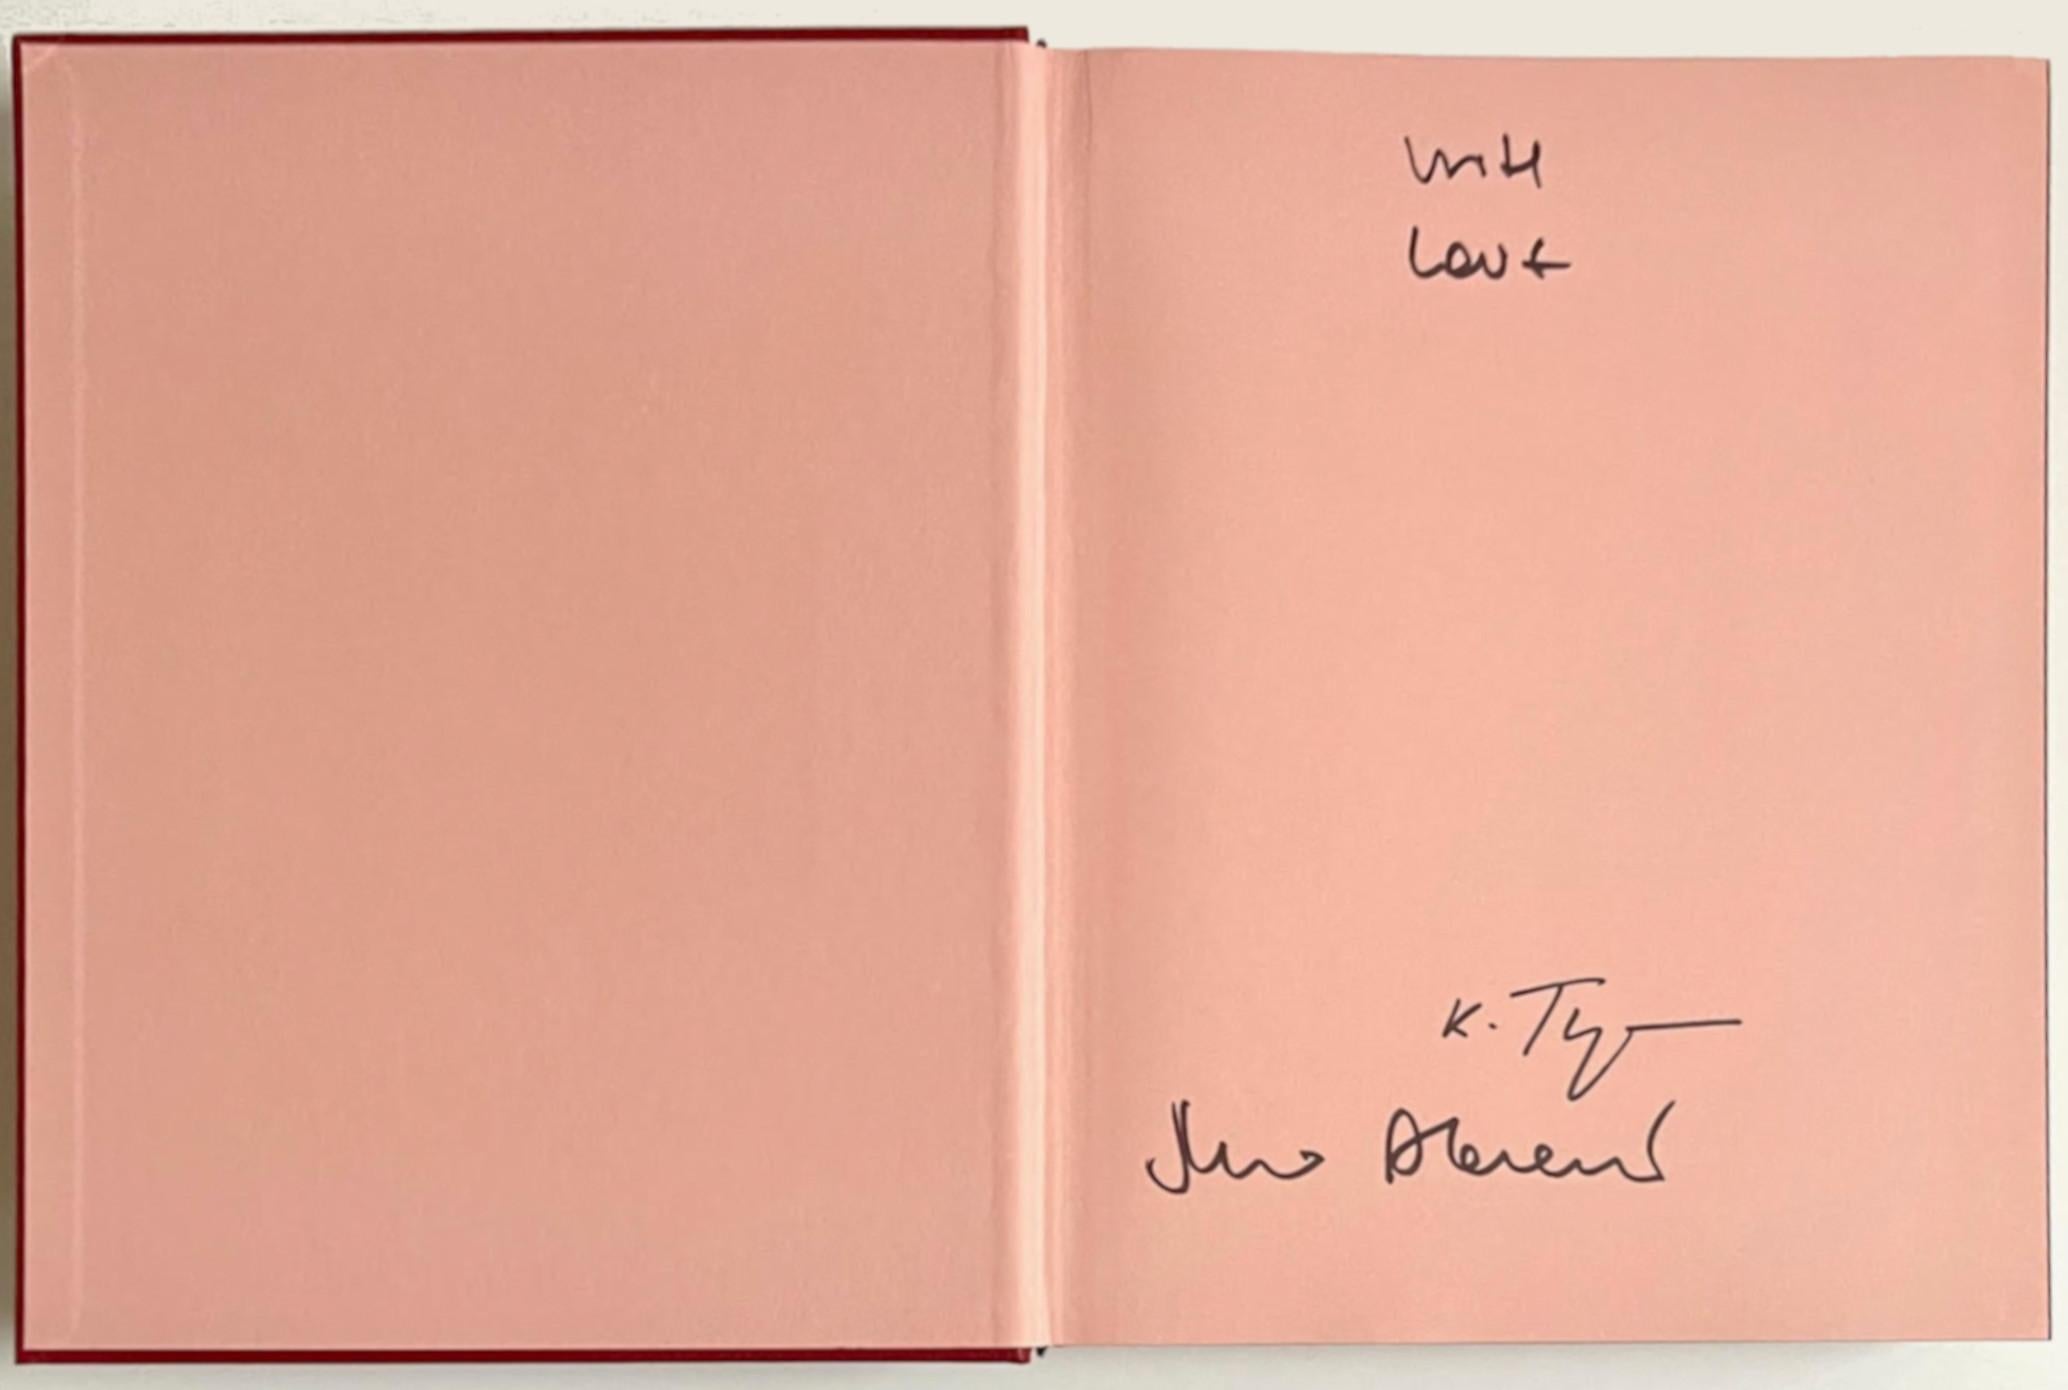 A Visual Biography (Hand signed by BOTH Marina Abramovic and Katya Tylevich) For Sale 2